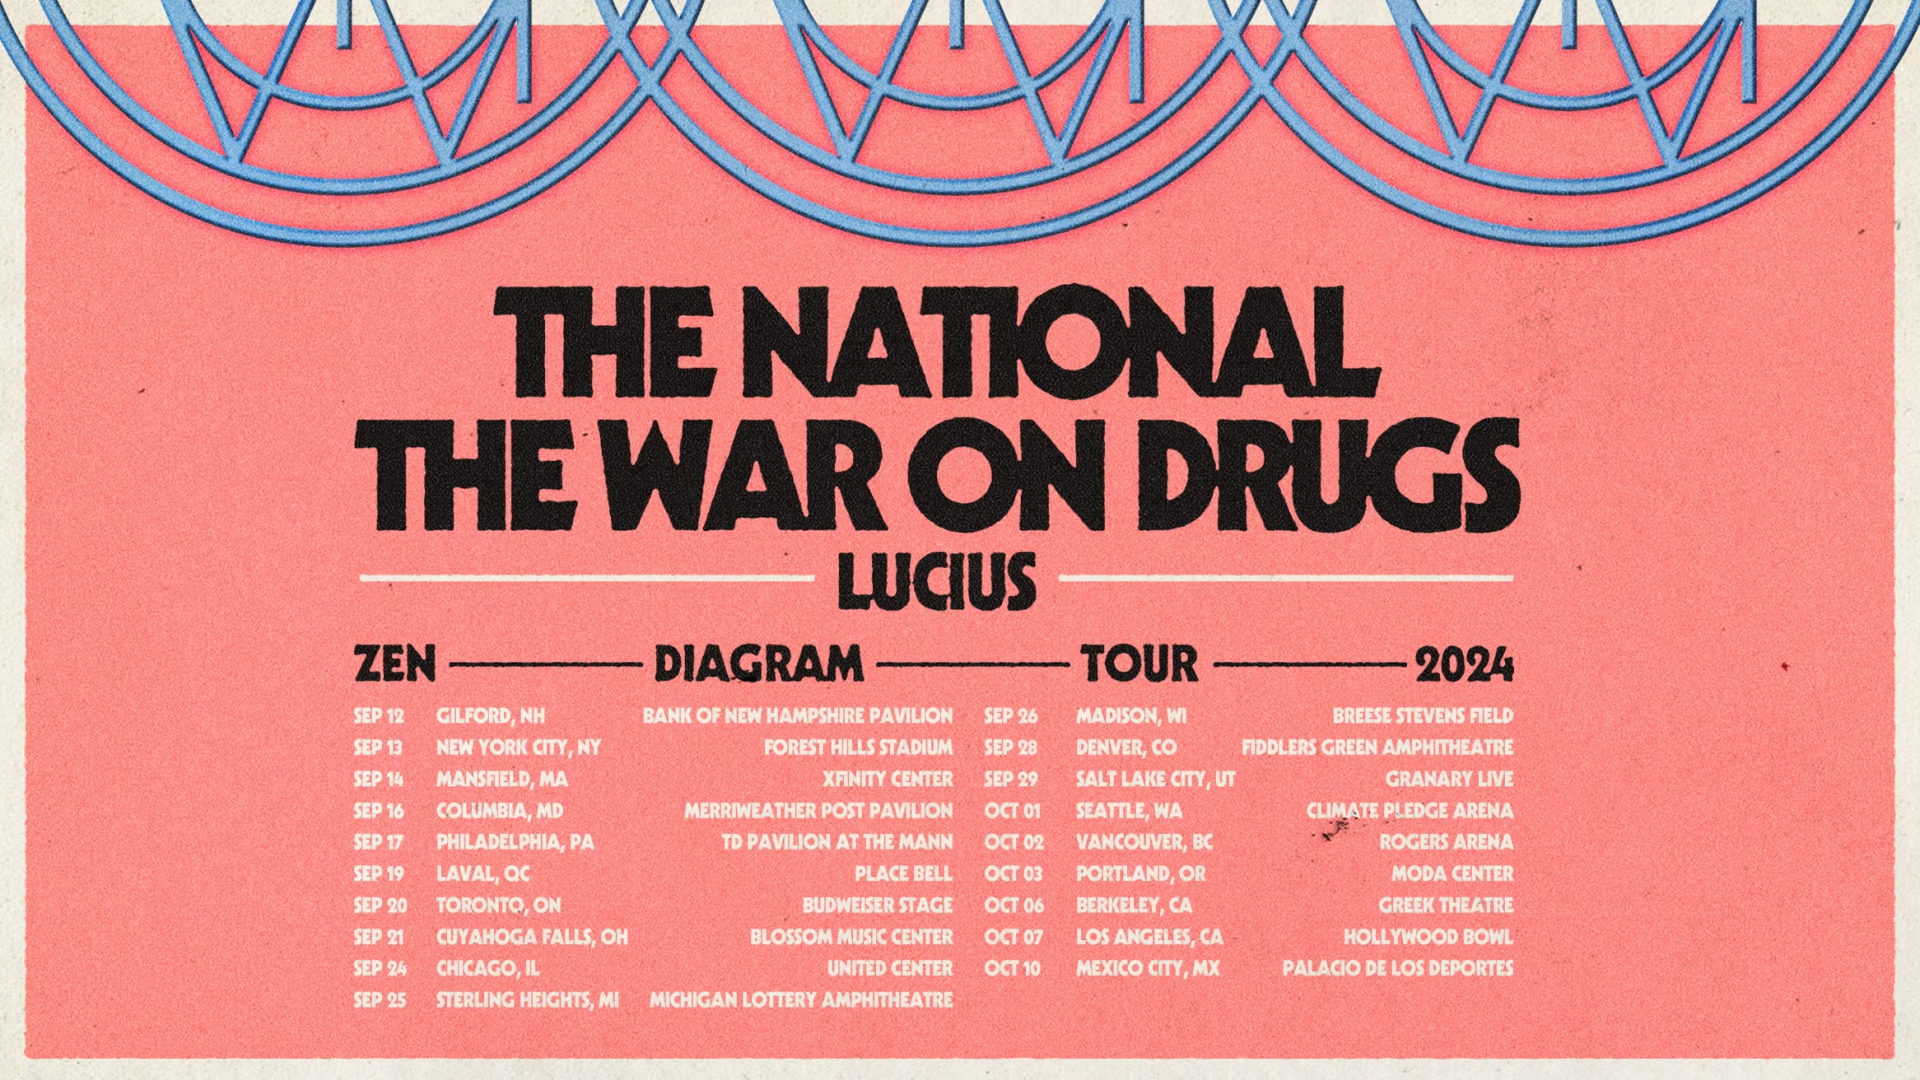 The National - The War On Drugs - Lucius at Xfinity Center Tickets